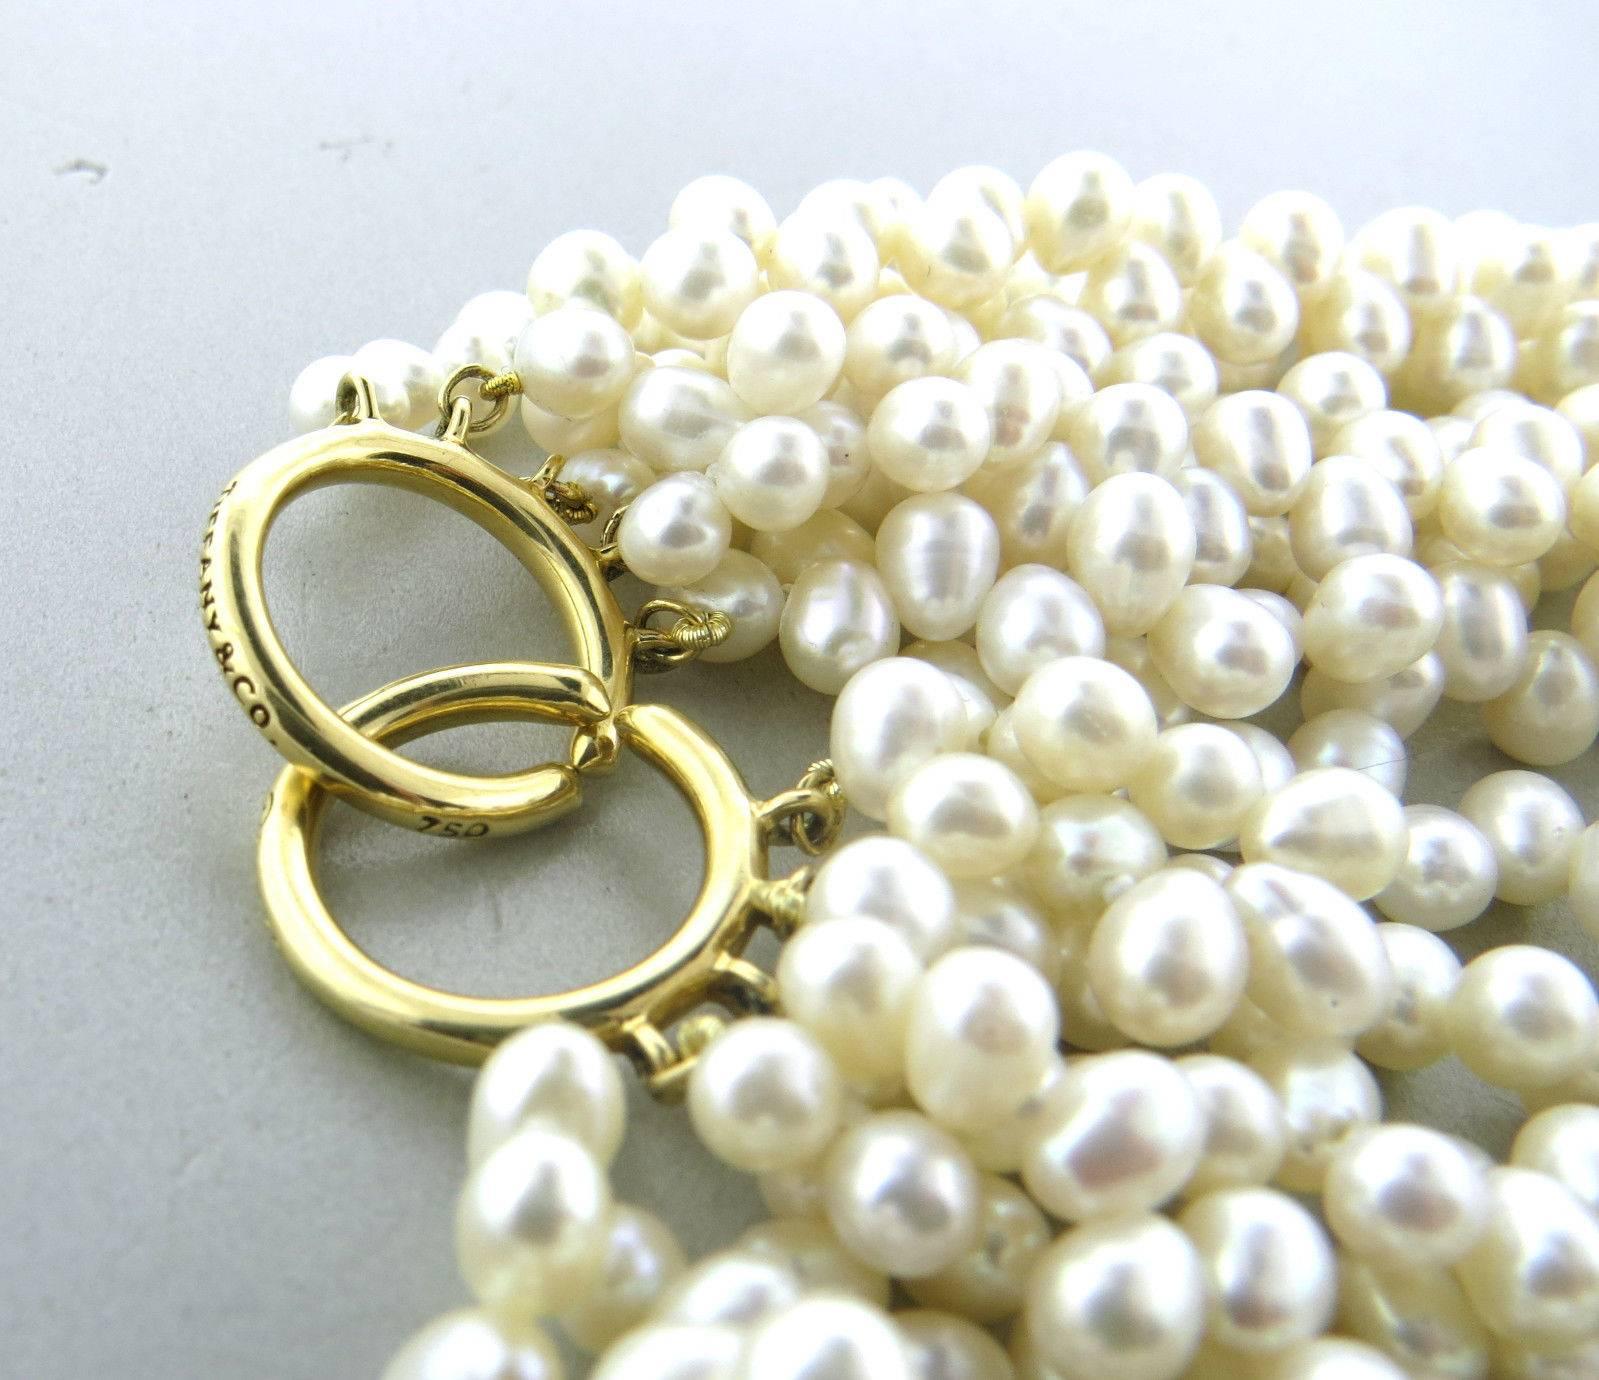 An 18k yellow gold necklace set with freshwater pearls approx. 6.5mm x 5mm.  Crafted by Tiffany & Co, the necklace is 16